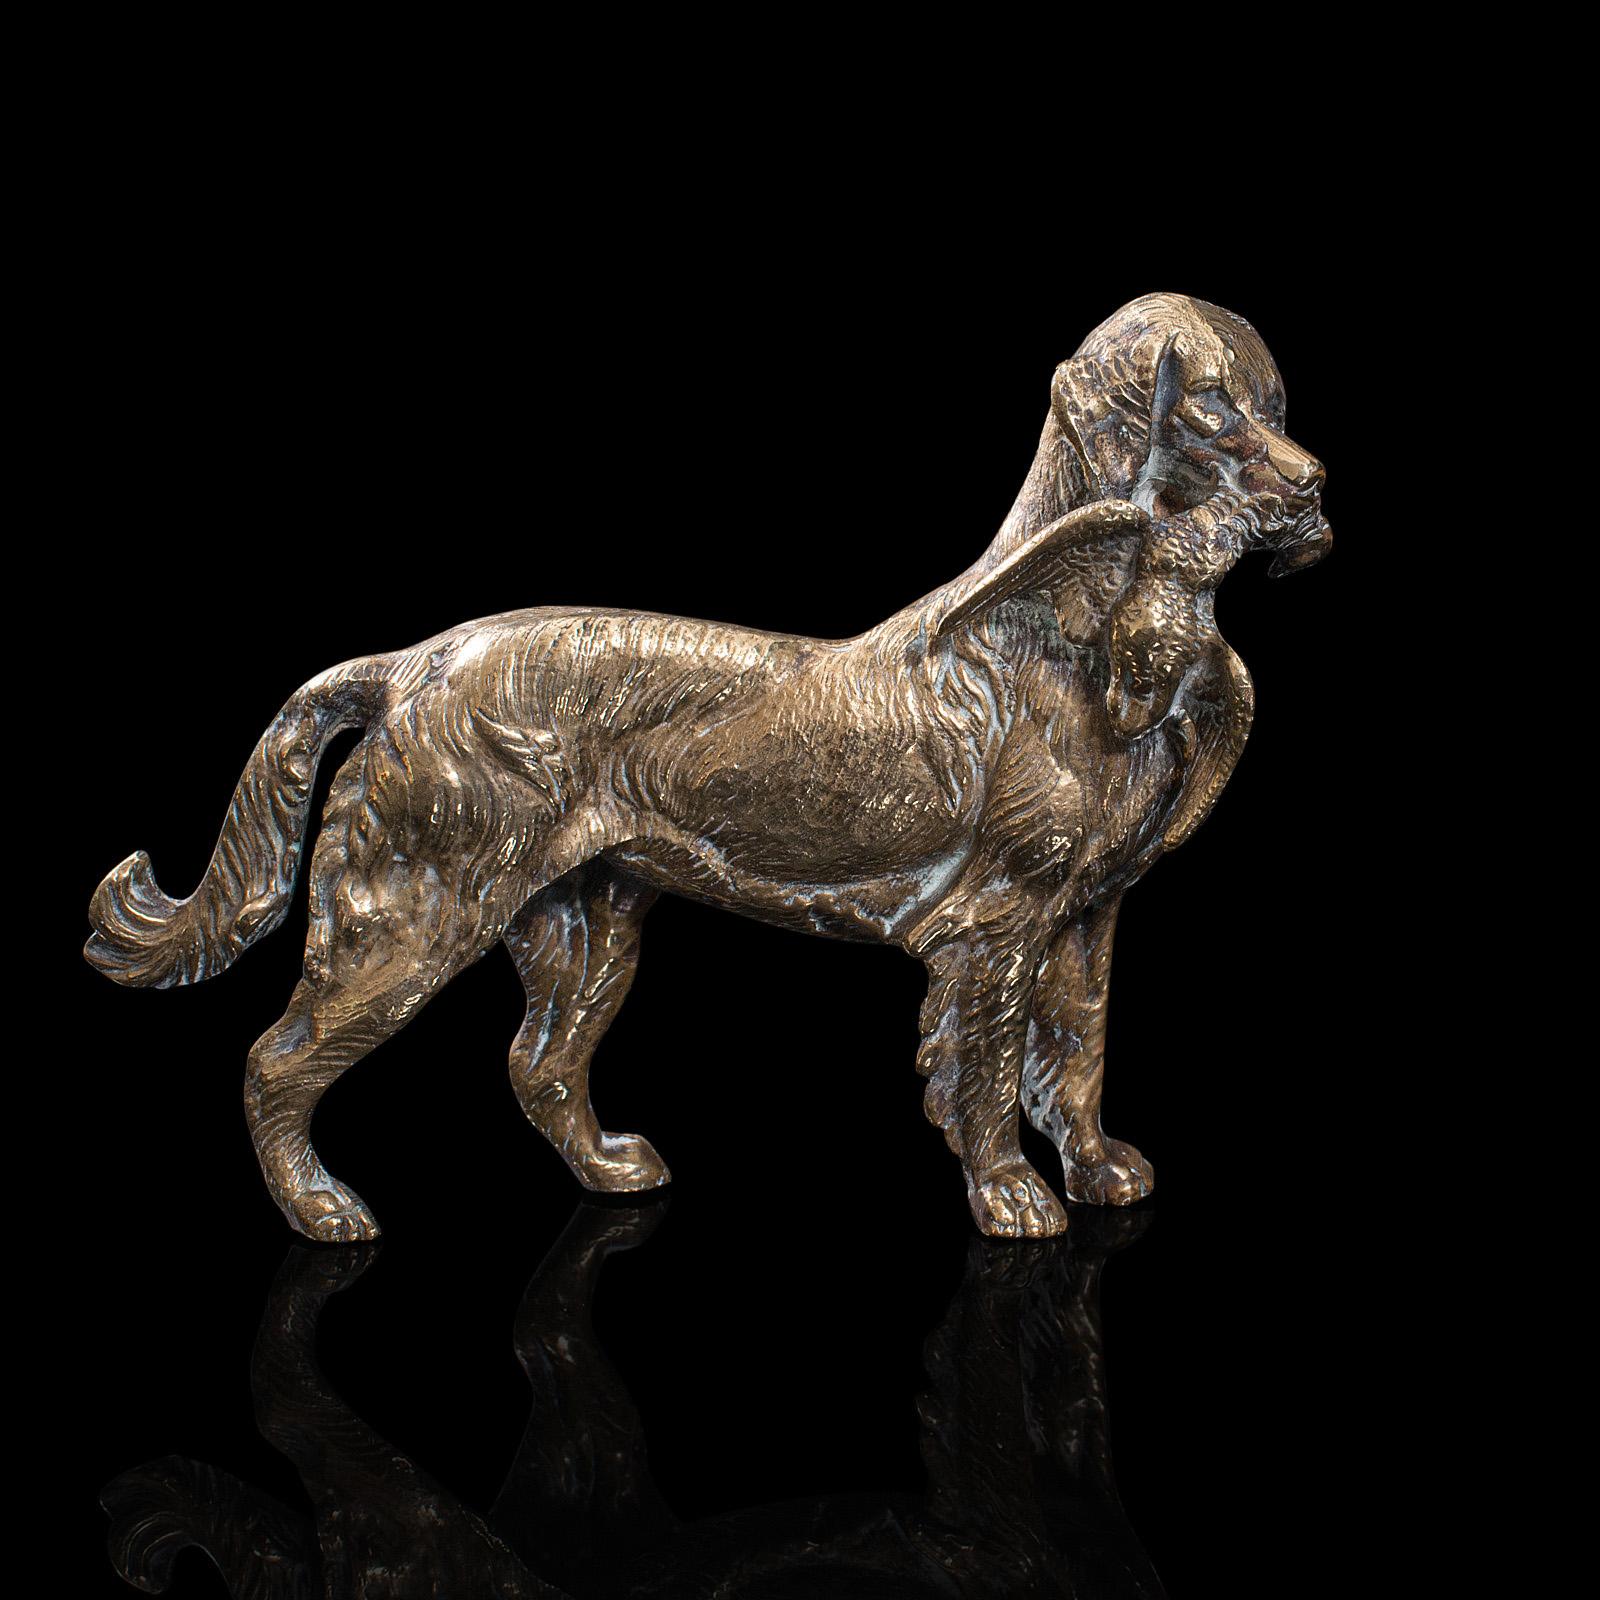 This is an antique Retriever statue. An English, cast brass decorative dog ornament in hunting pose, dating to the late Victorian period, circa 1900.

Quality Victorian study of the ever popular breed
Displaying a desirable aged patina with